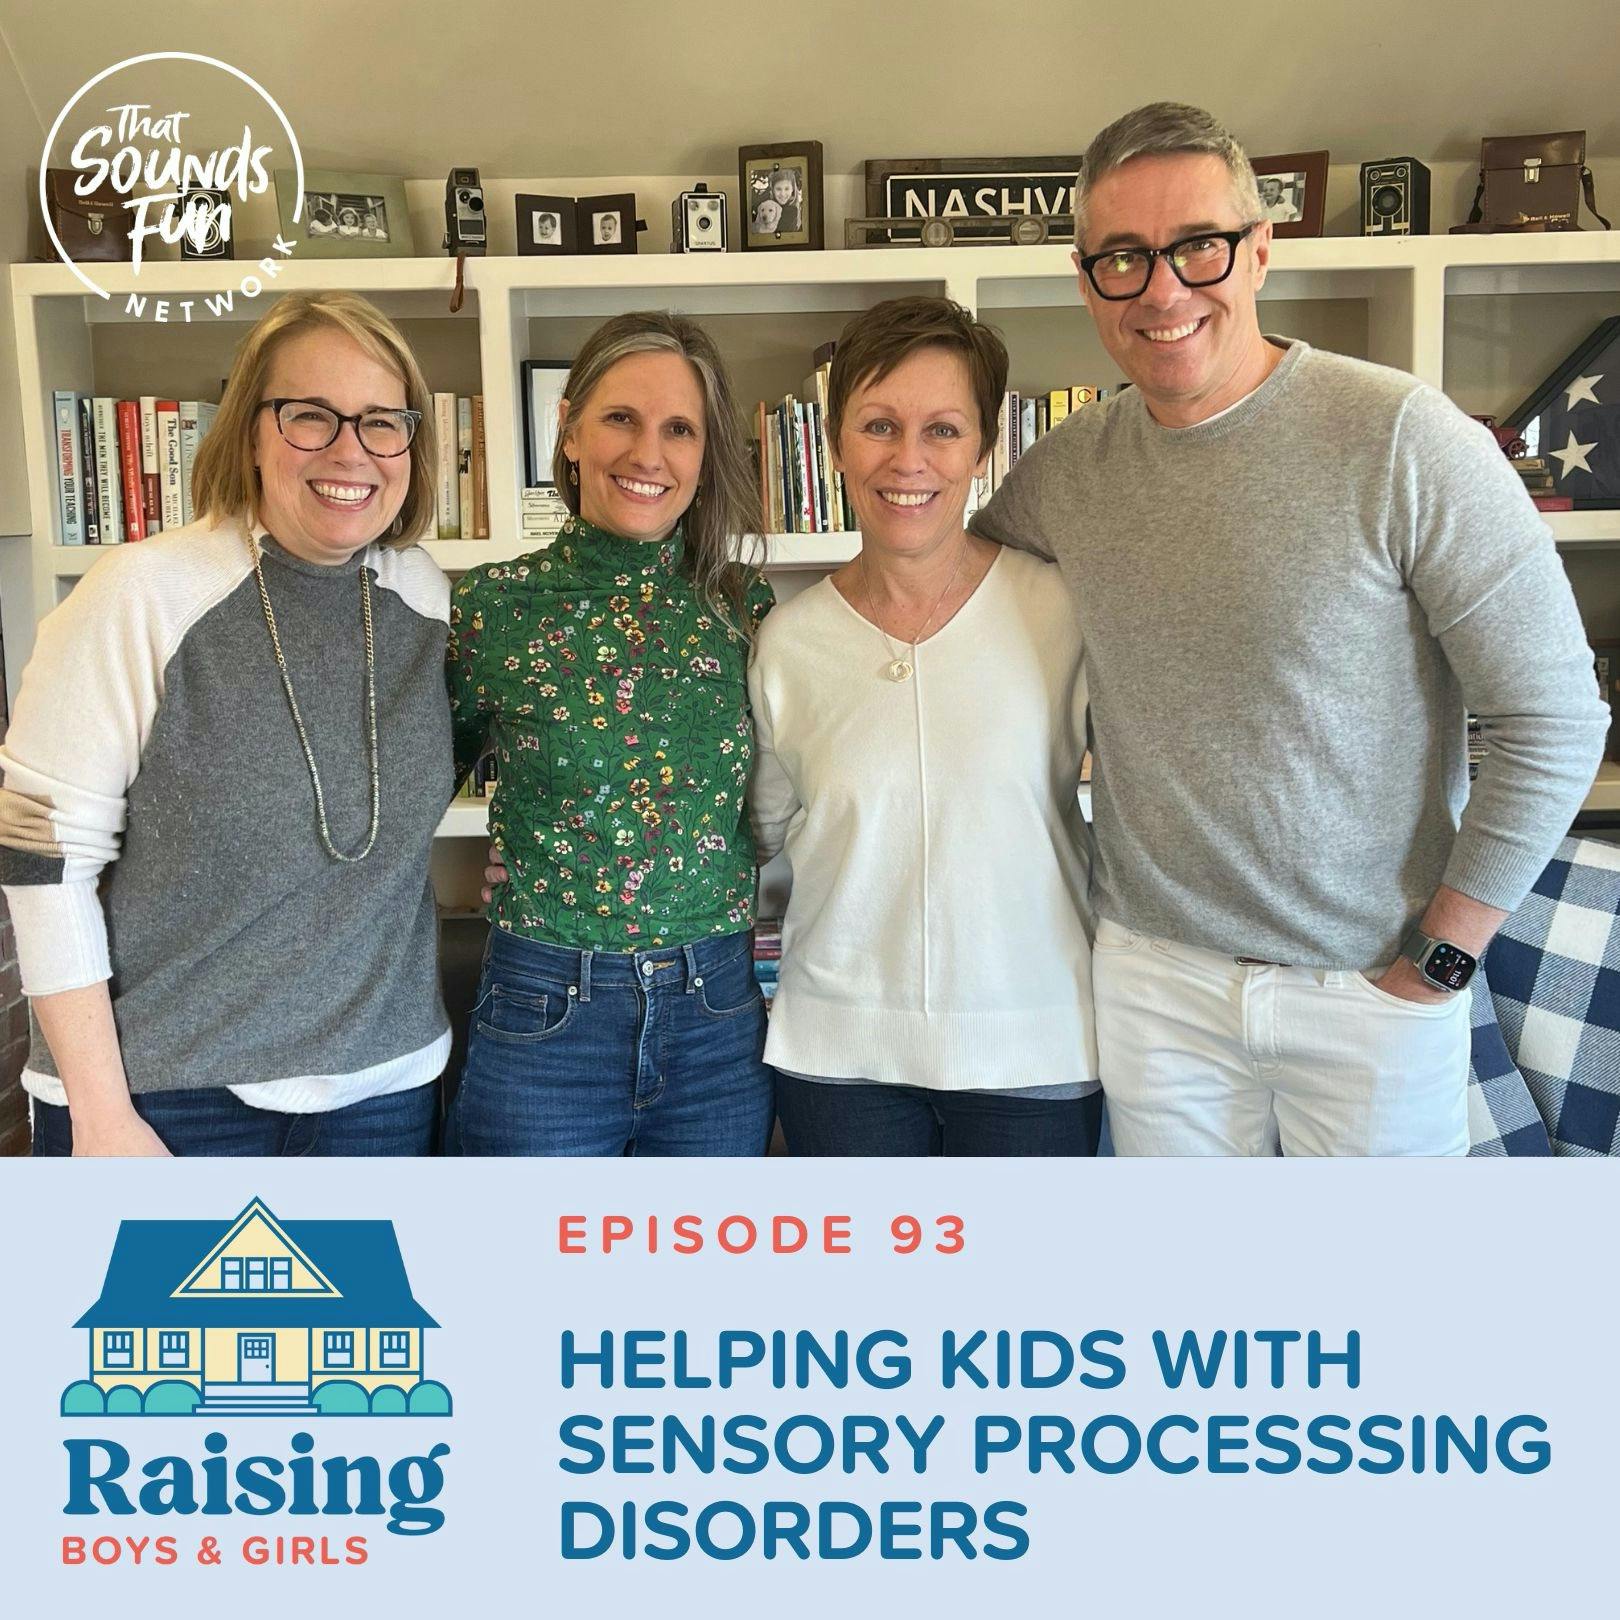 Episode 93: Helping Kids with Sensory Processsing Disorders